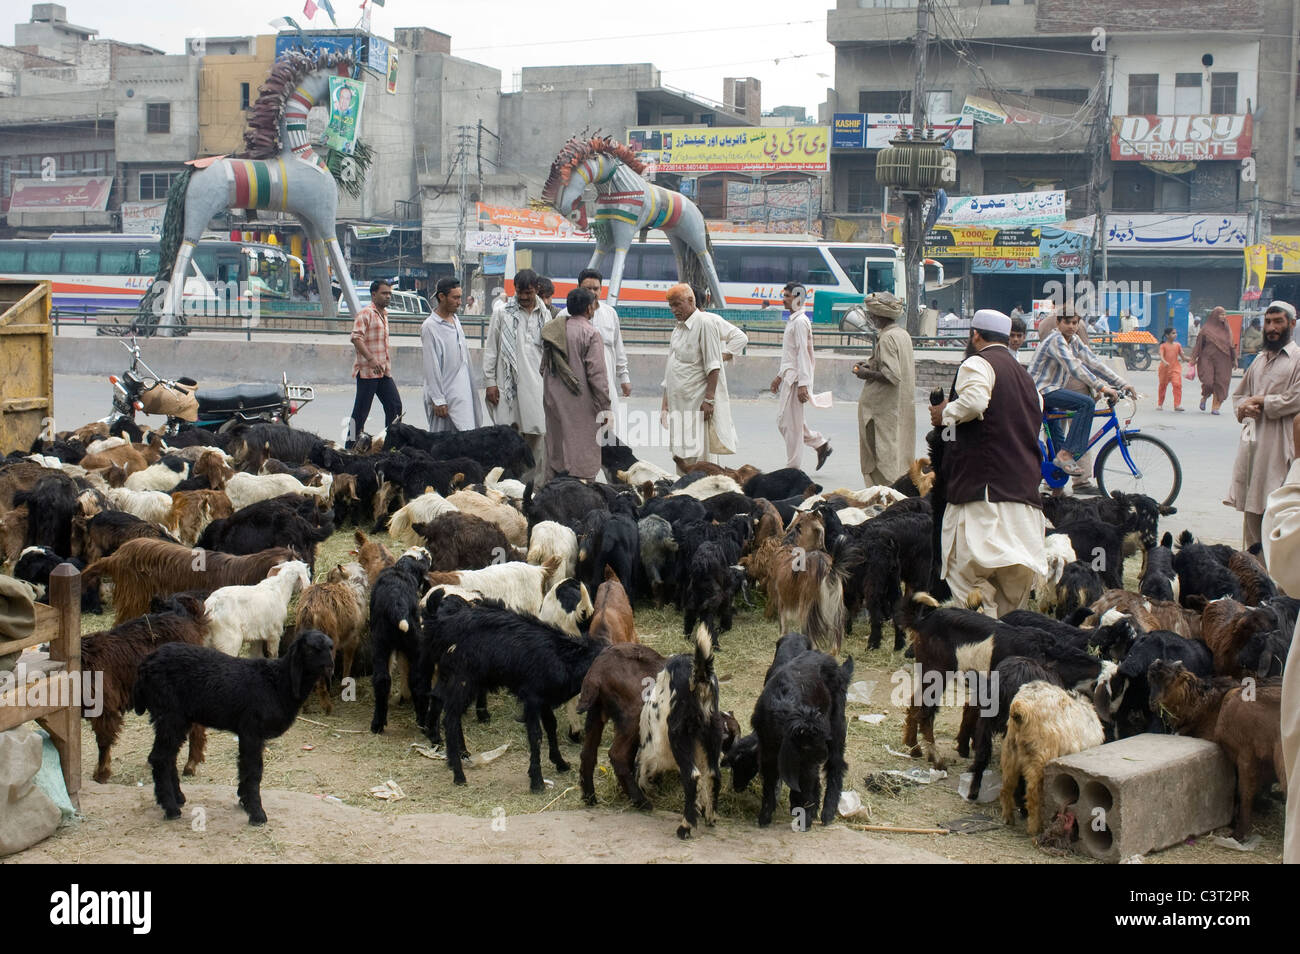 A street side goat market on Circular Rd outside the Old City. Stock Photo